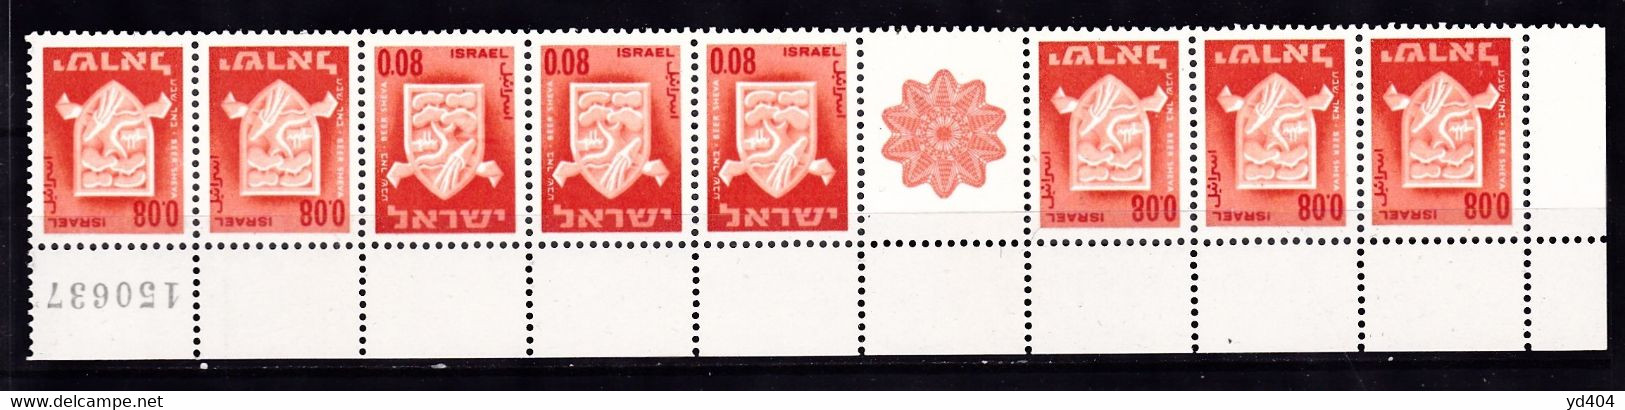 IL57- ISRAEL – 1966 – CURRENT ISSUES FOR BOOKLETS – Y&T # 275a/b MNH - Carnets